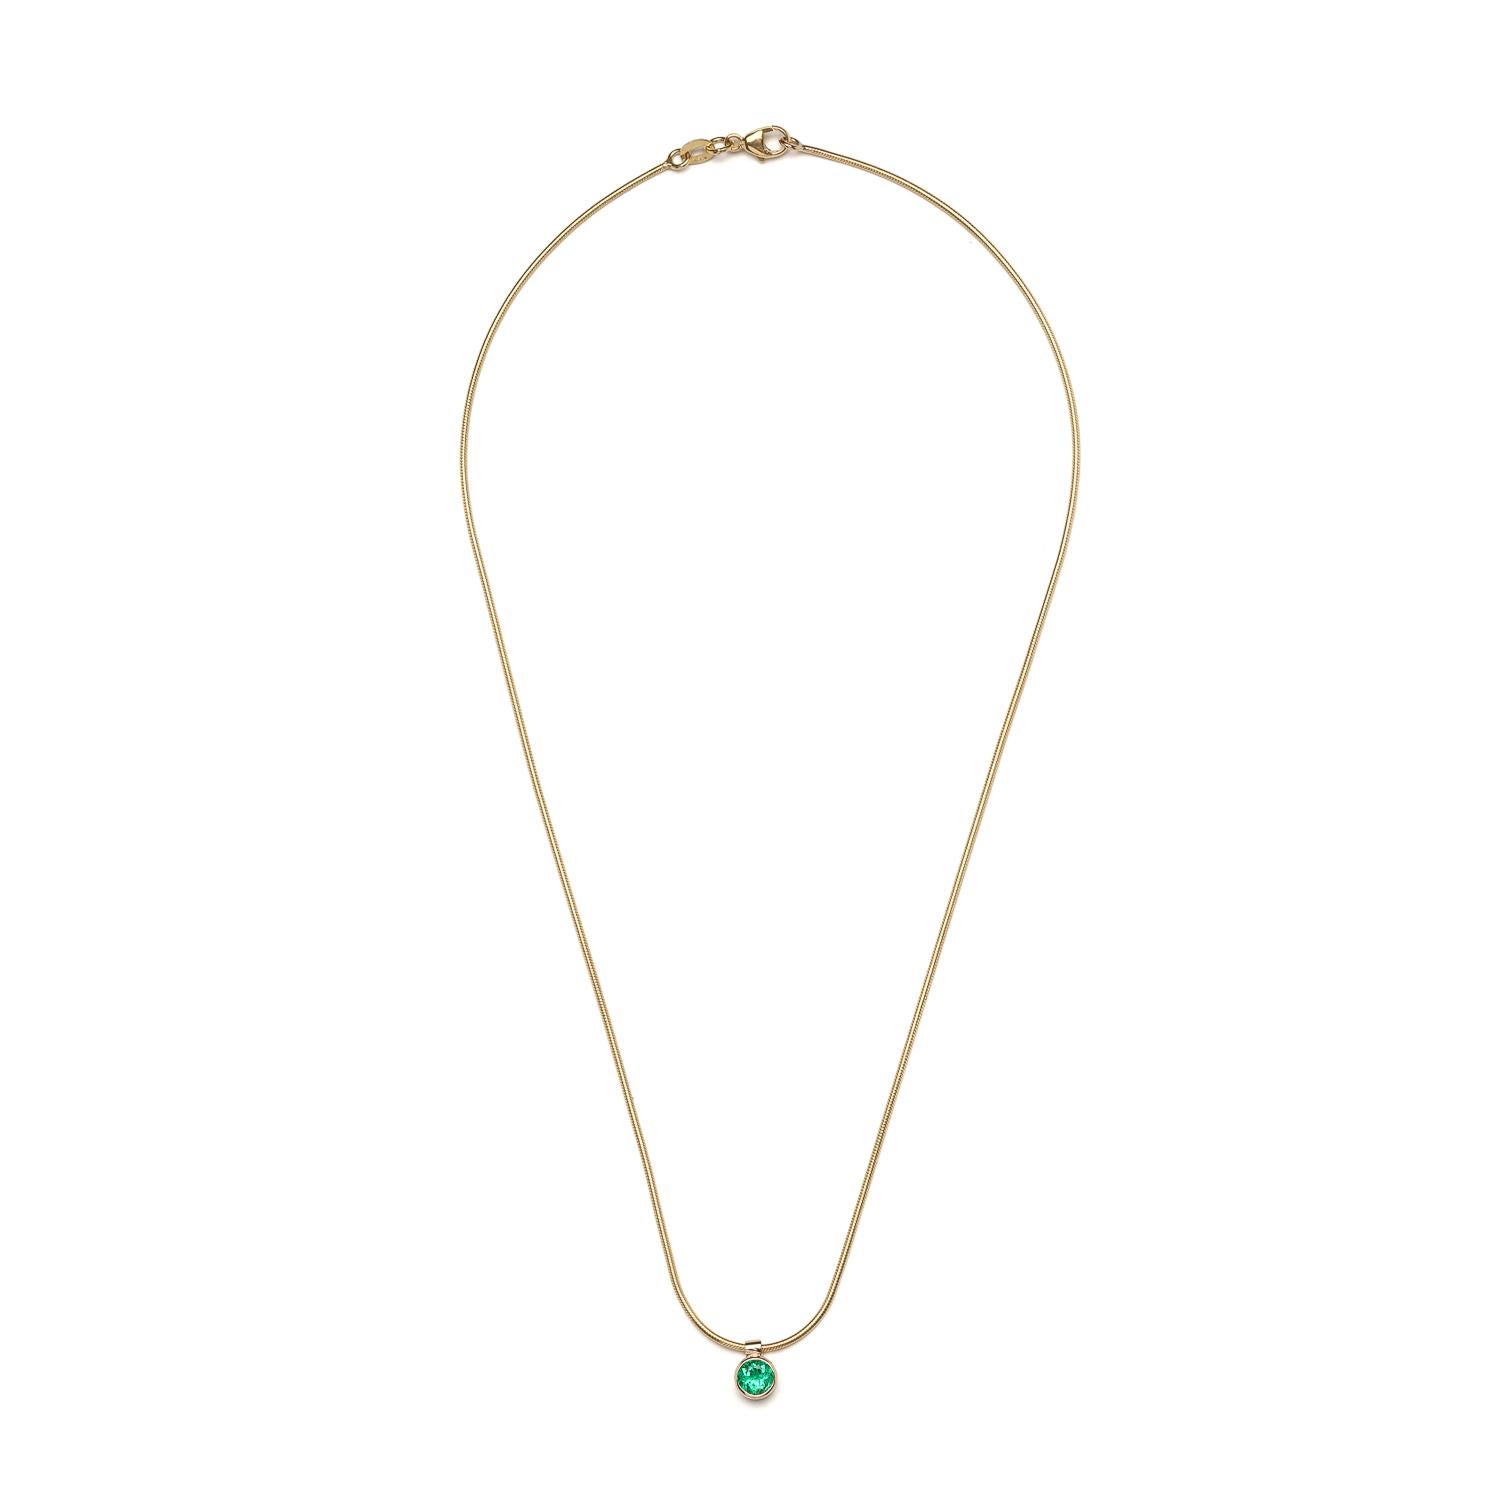 A bright bluish green emerald is the main focus of the Clea Necklace. A slinky 14k yellow gold snake chain follows the shape of your neck, for a comfortable look and feel.

Emerald is 5mm / 0.5 carats
14k yellow gold chain in 15'' (pictured). Also